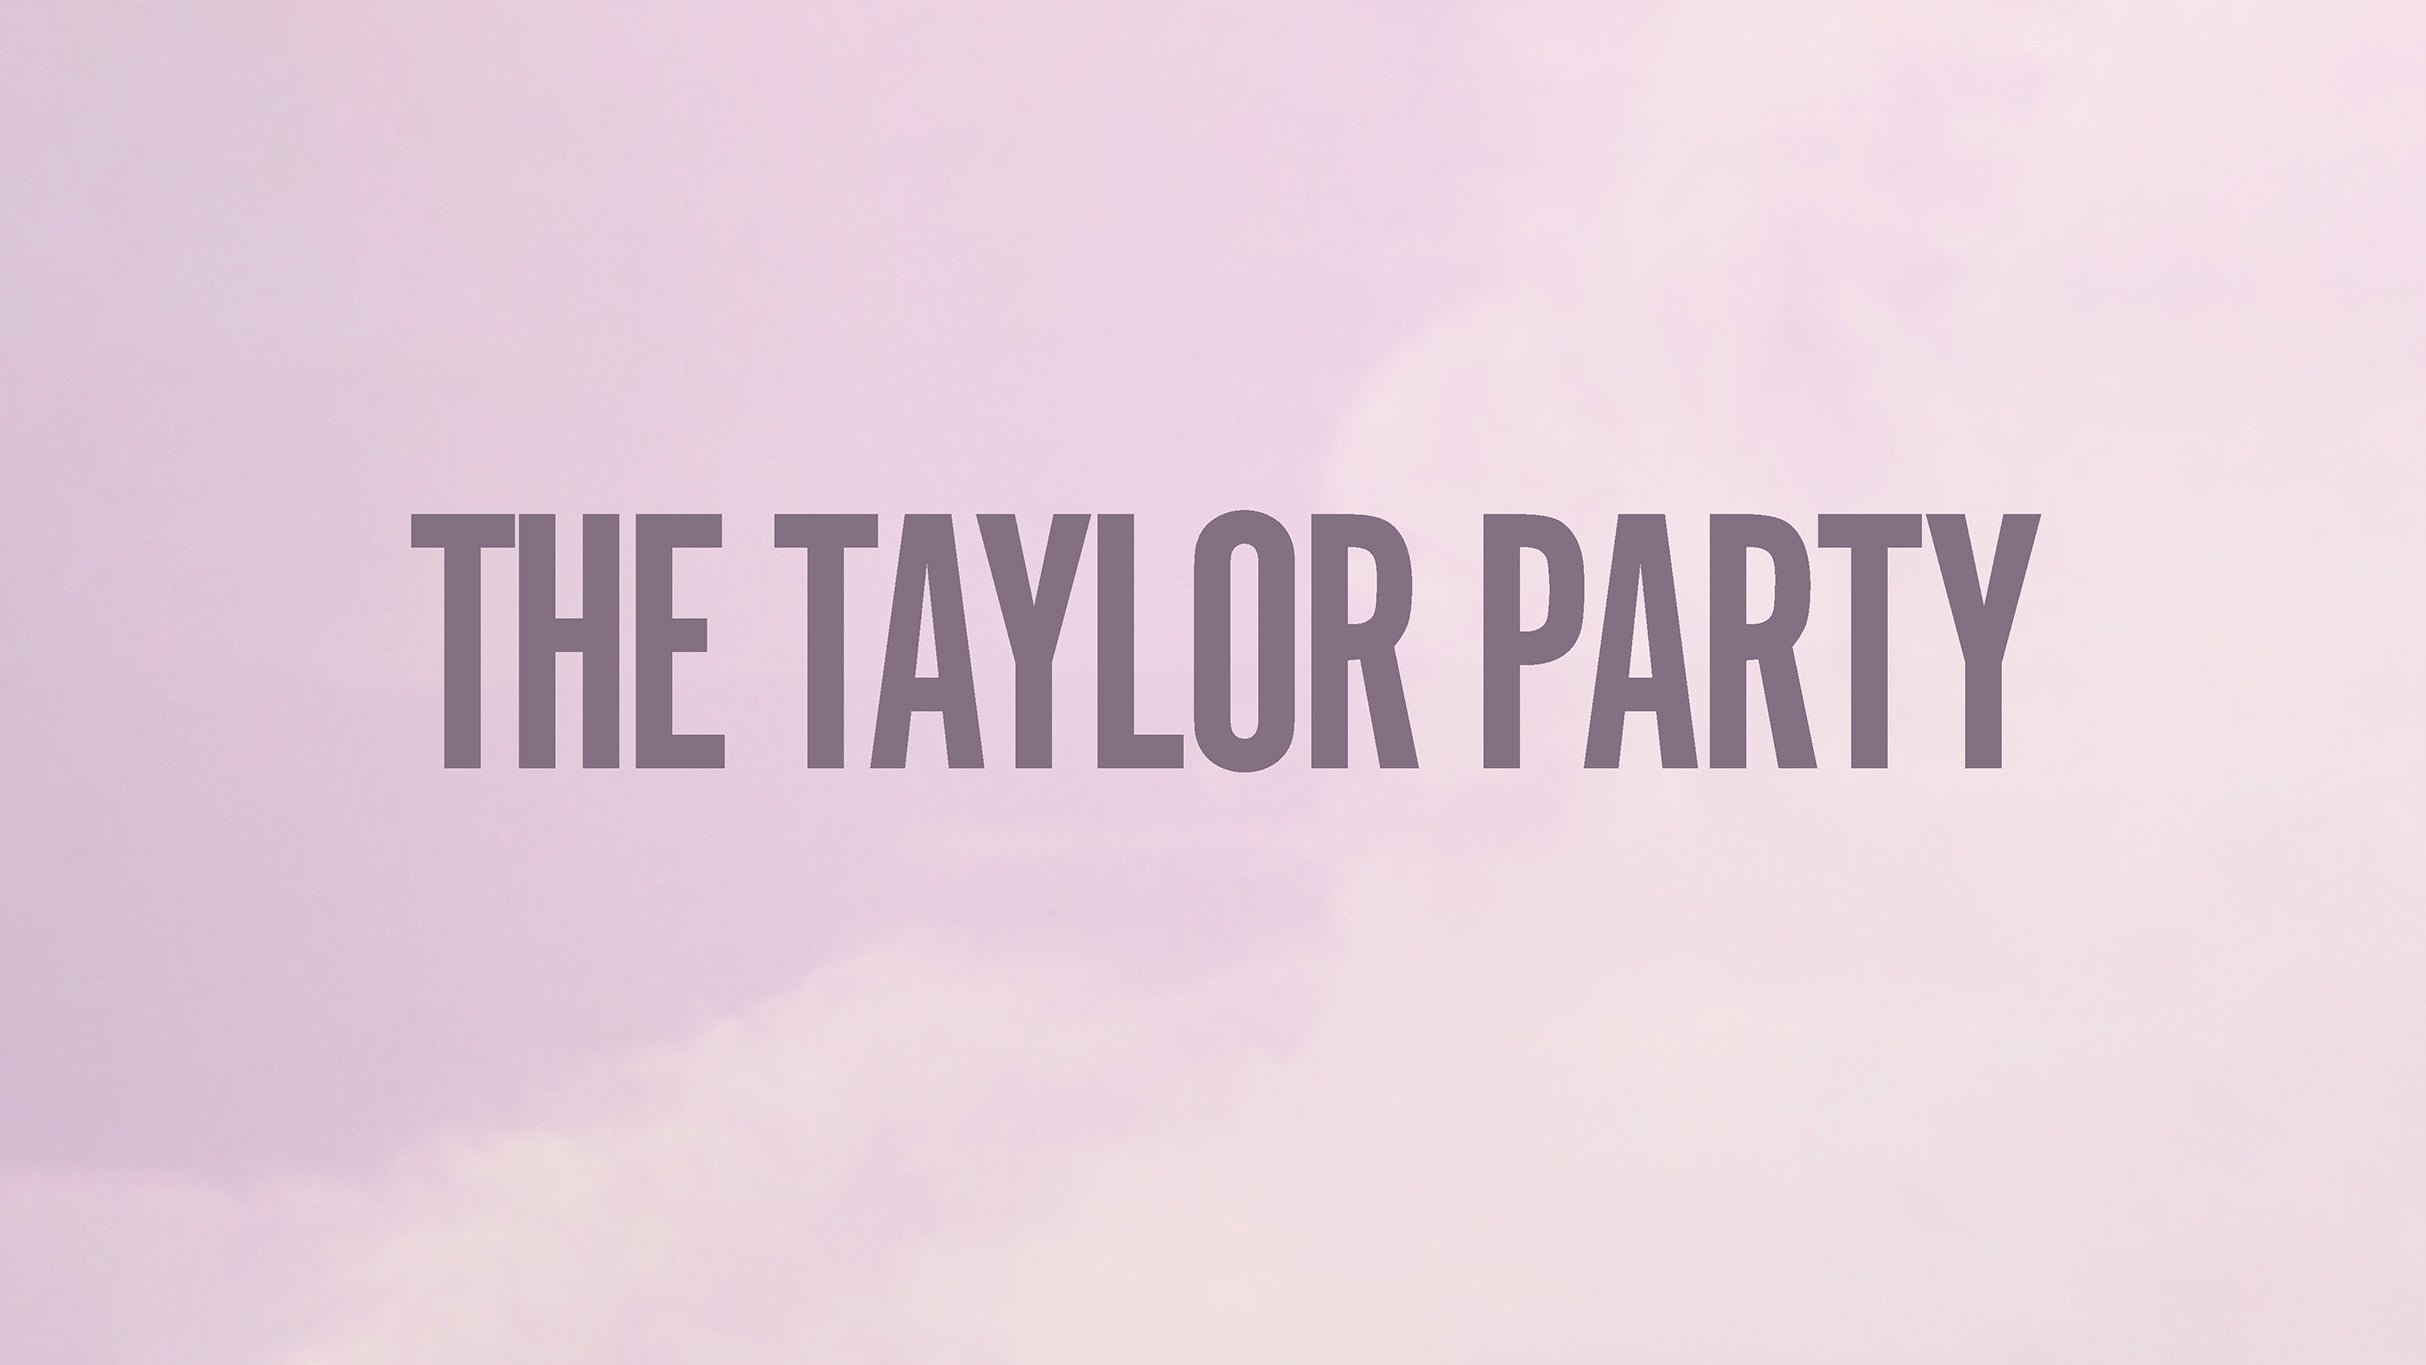 The Taylor Party: The TS Dance Party - 21+ pre-sale password for concert tickets in Chicago, IL (House of Blues Chicago)